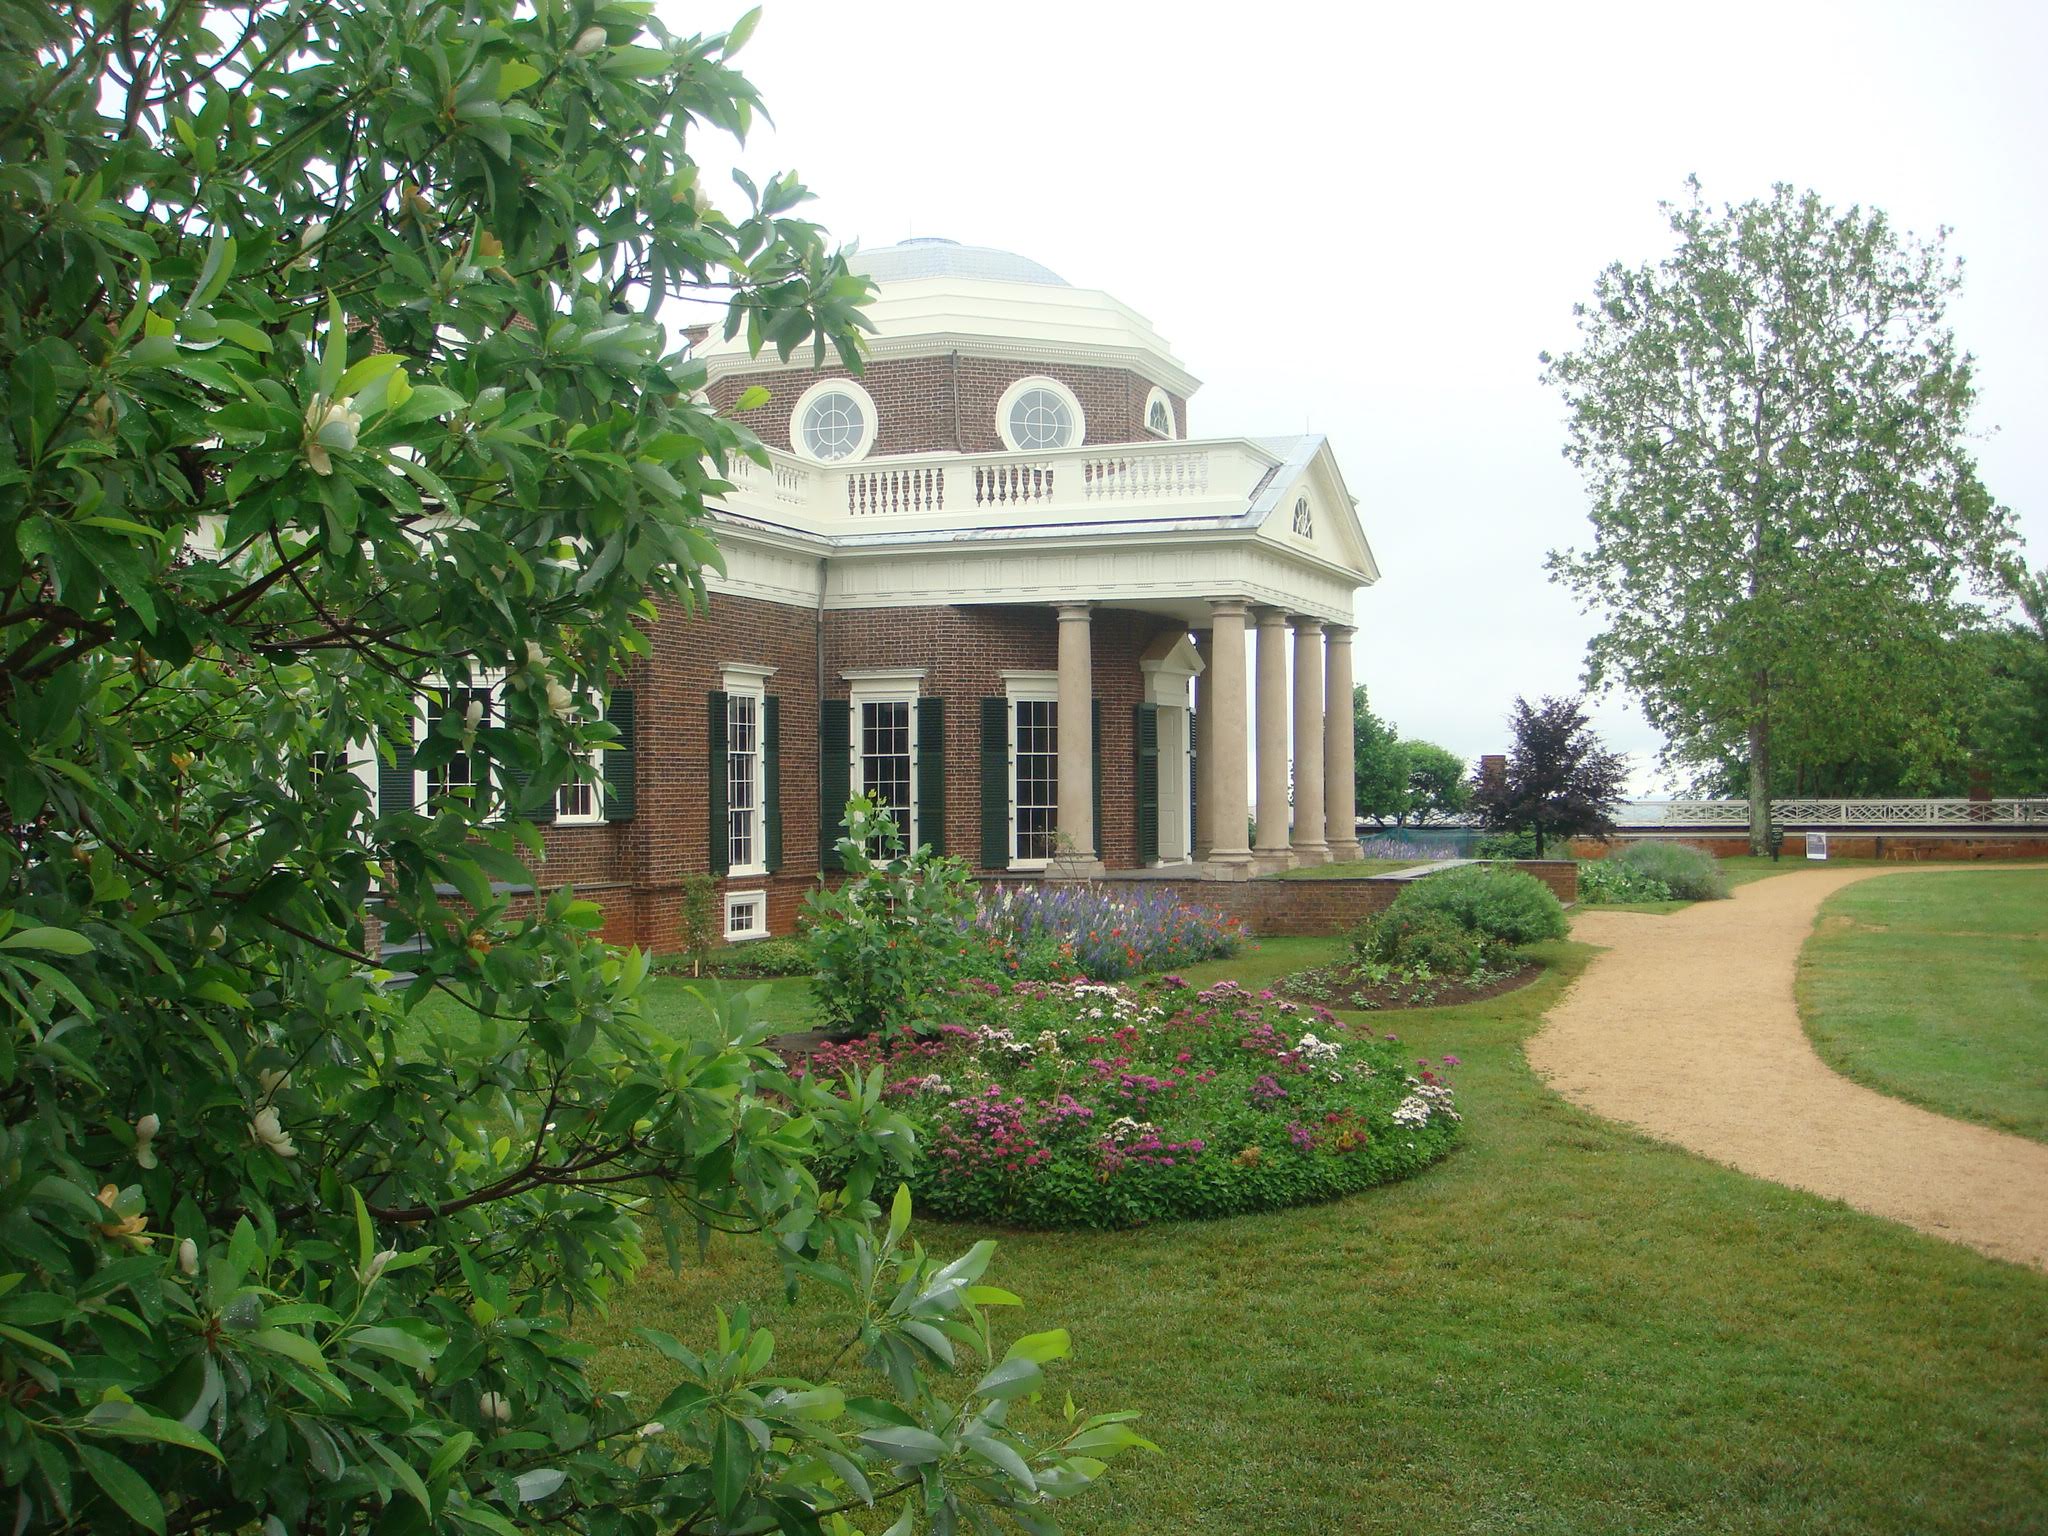 Monticello, home of Thomas Jefferson, the third President of the United States. A lot of Irish labor was used in building and maintaining the structure. (Photo courtesy of the author)